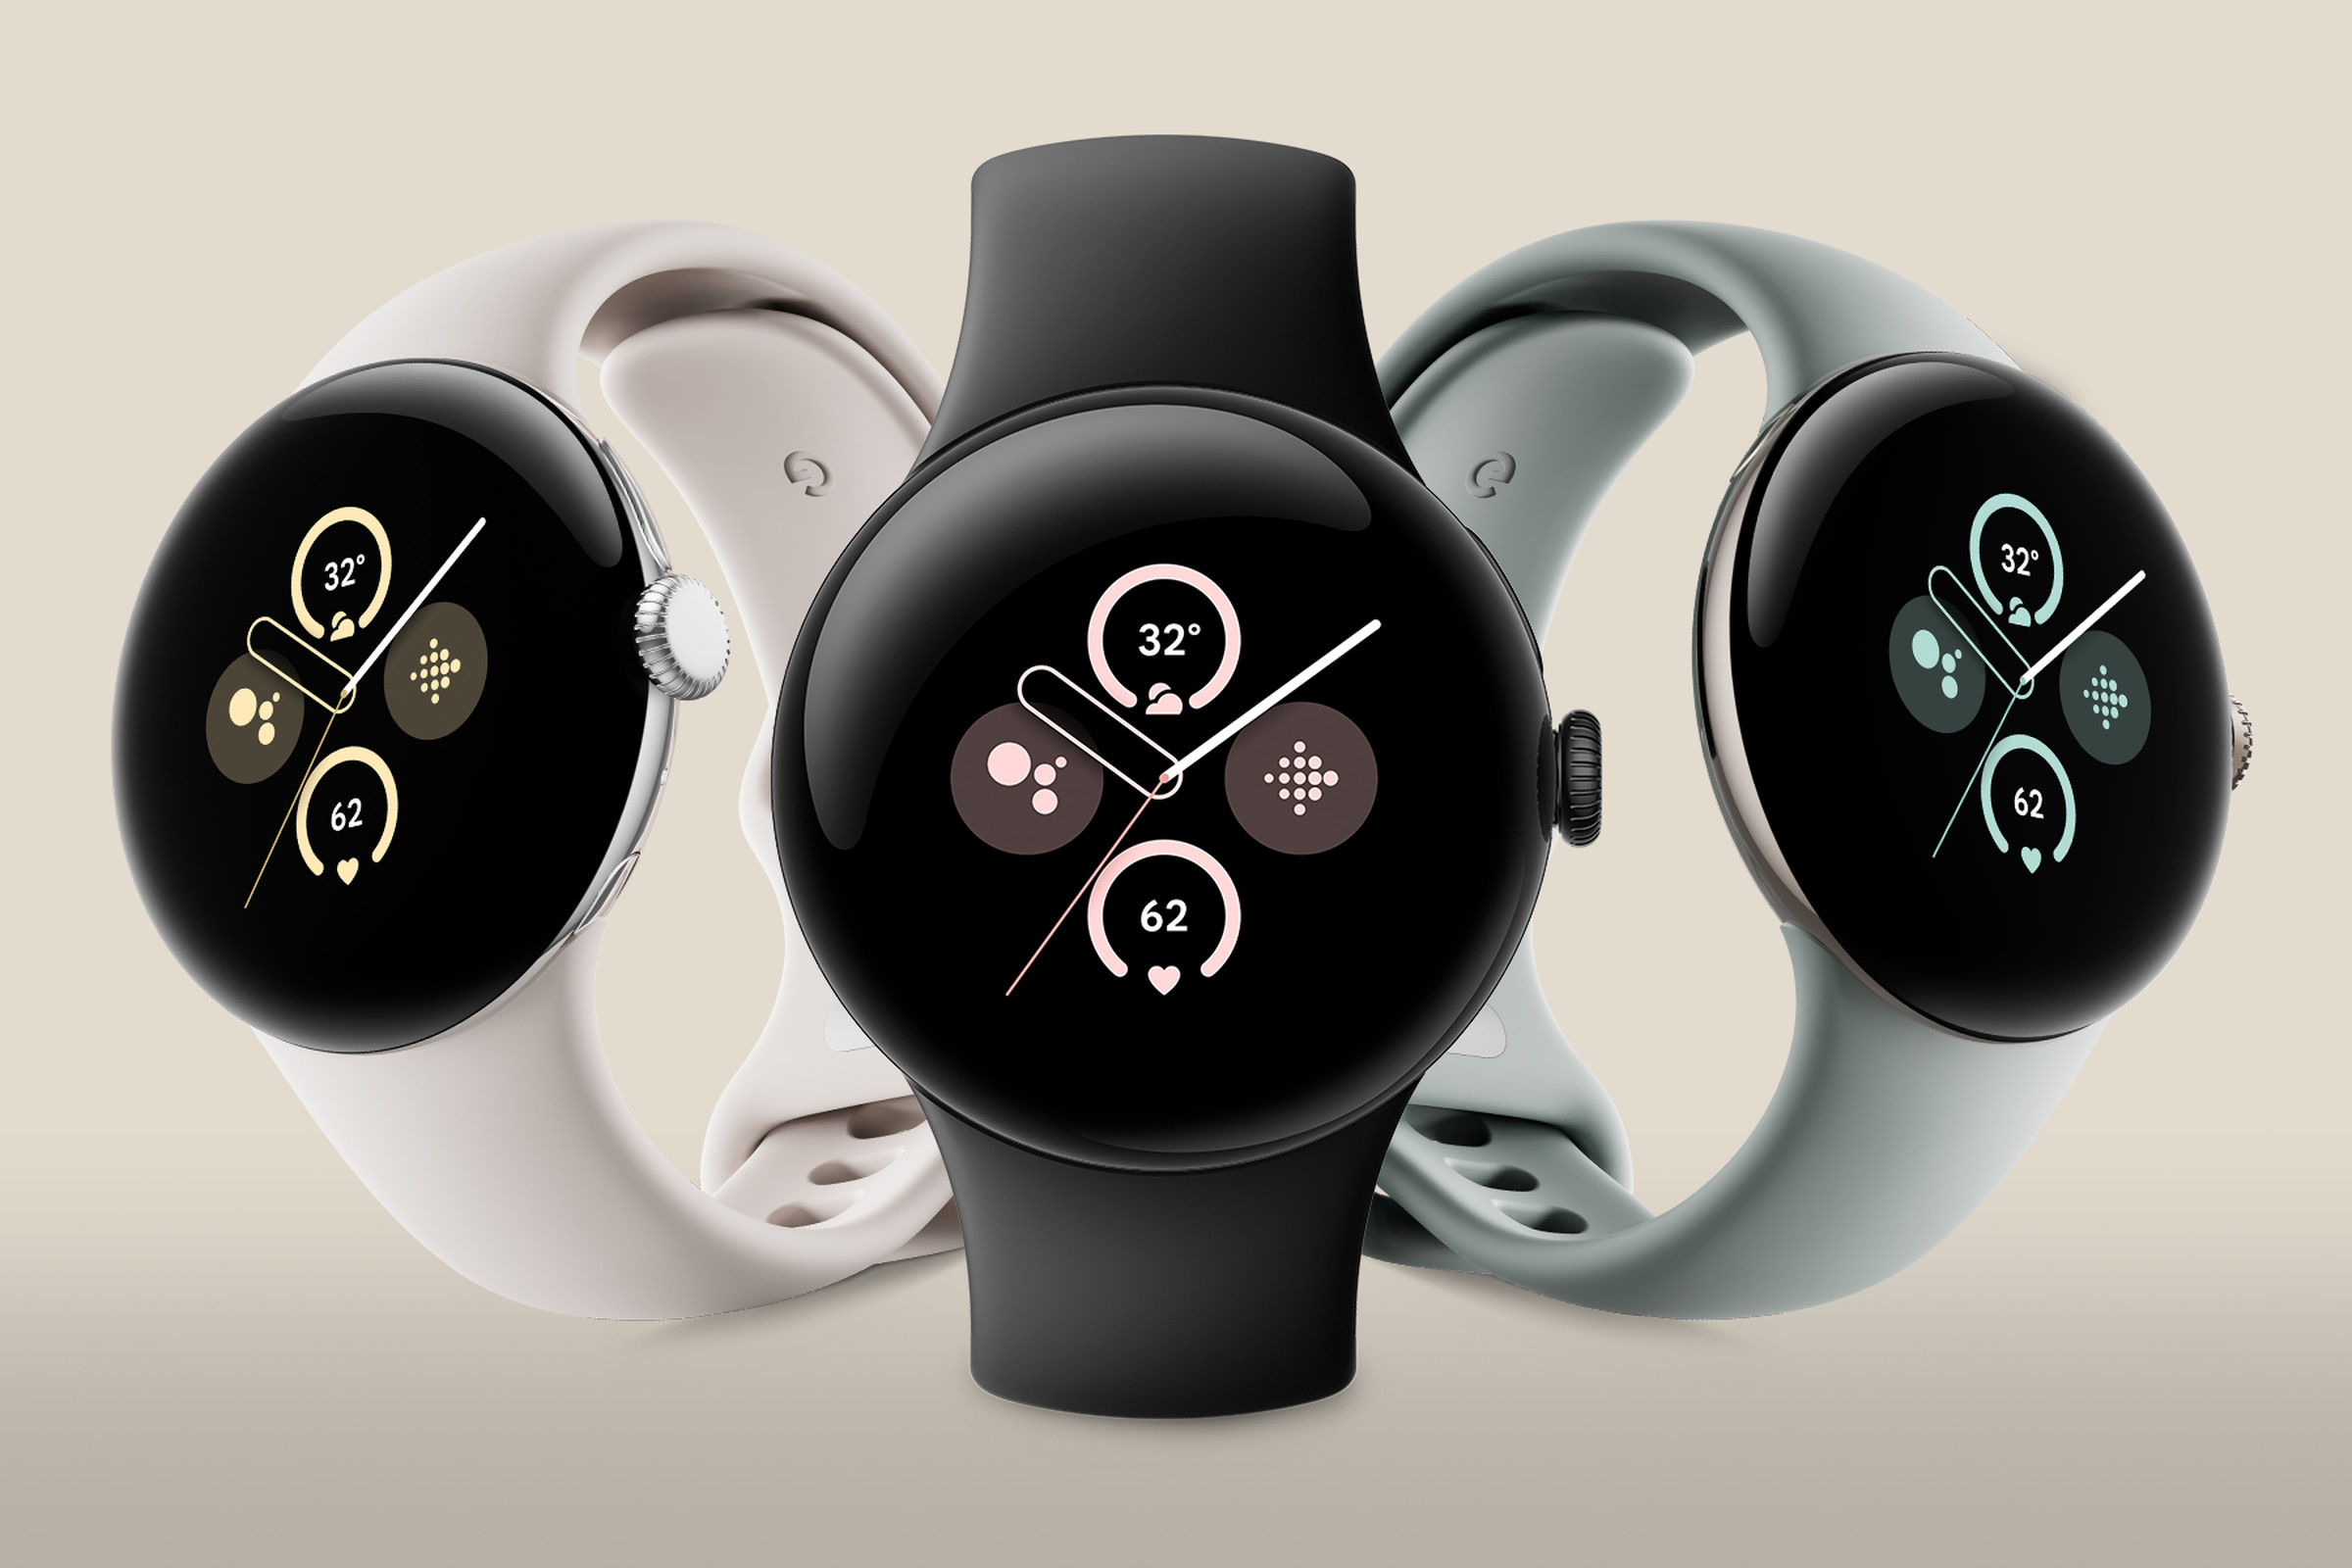 The Google Pixel Watch 2 in its three case colors and finishes (left to right) : polished silver, matte black, and champagne gold.